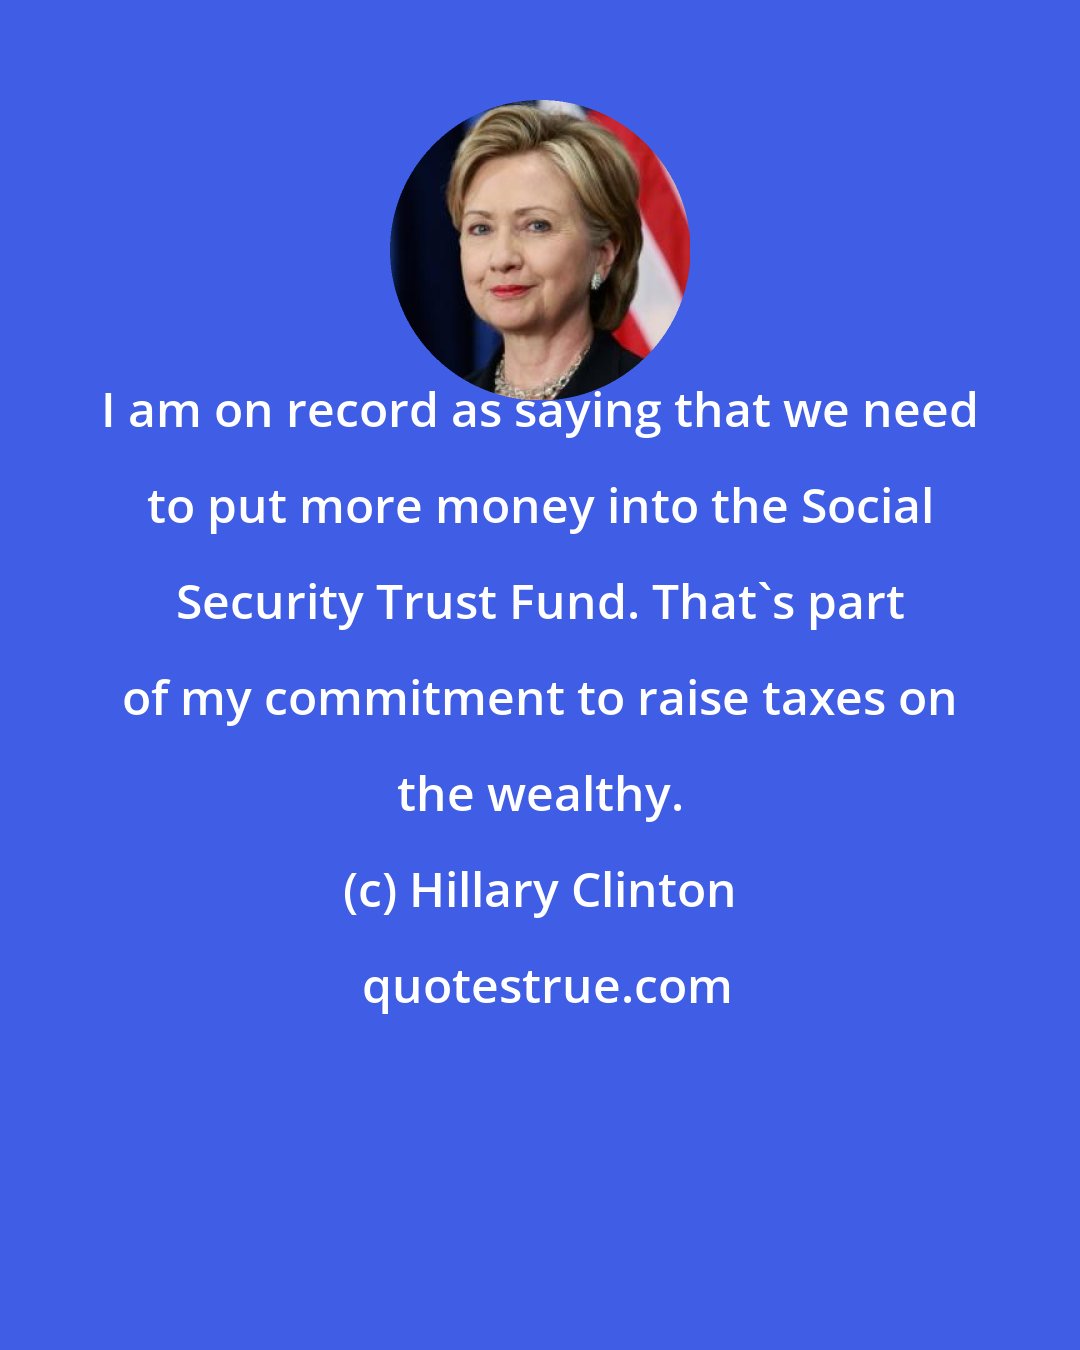 Hillary Clinton: I am on record as saying that we need to put more money into the Social Security Trust Fund. That's part of my commitment to raise taxes on the wealthy.